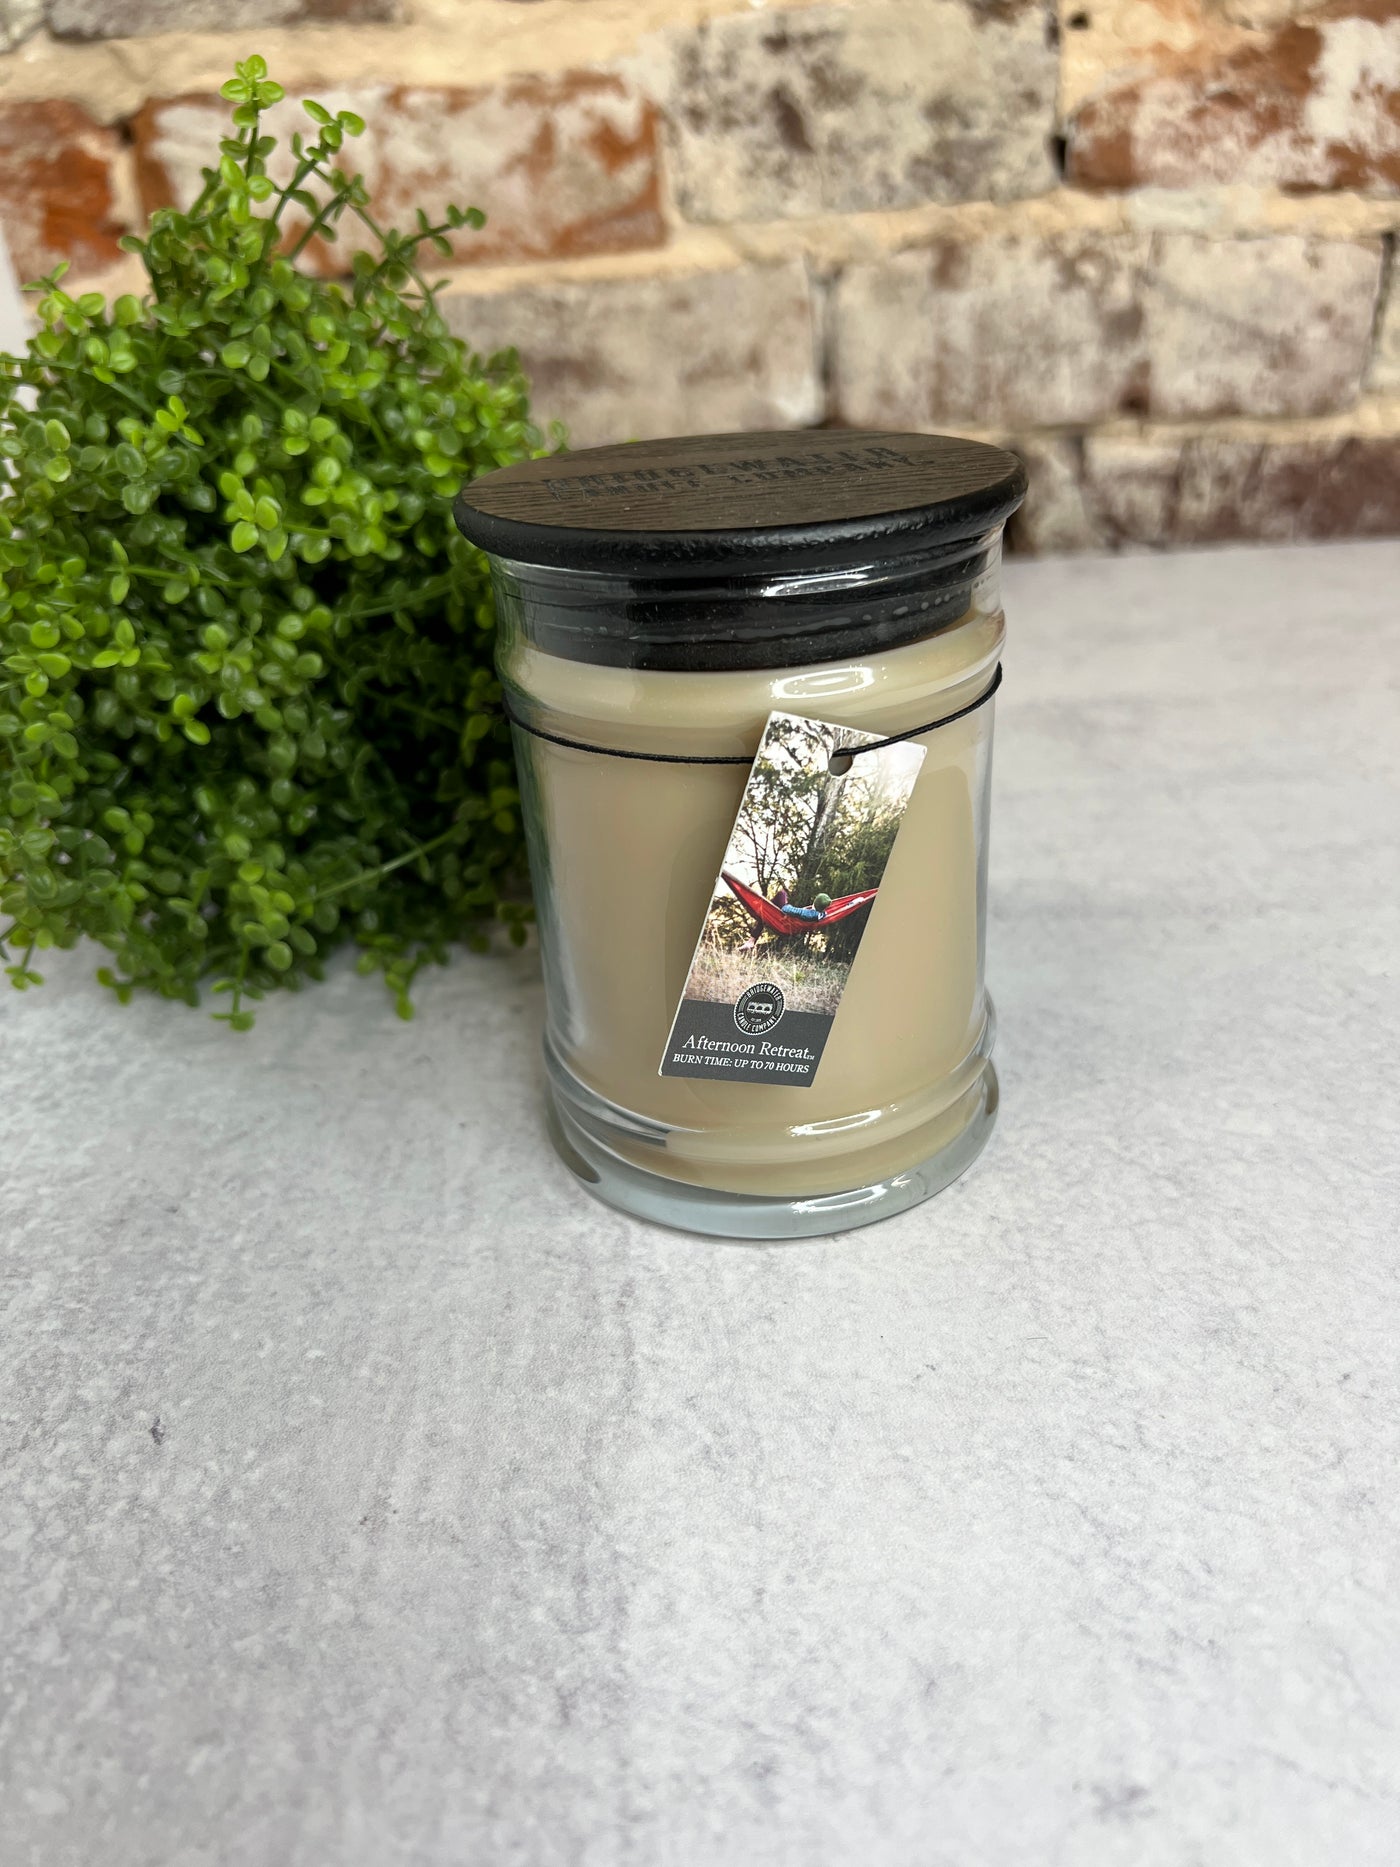 8oz Jar Candle - Afternoon Retreat | Bridgewater Candle Co